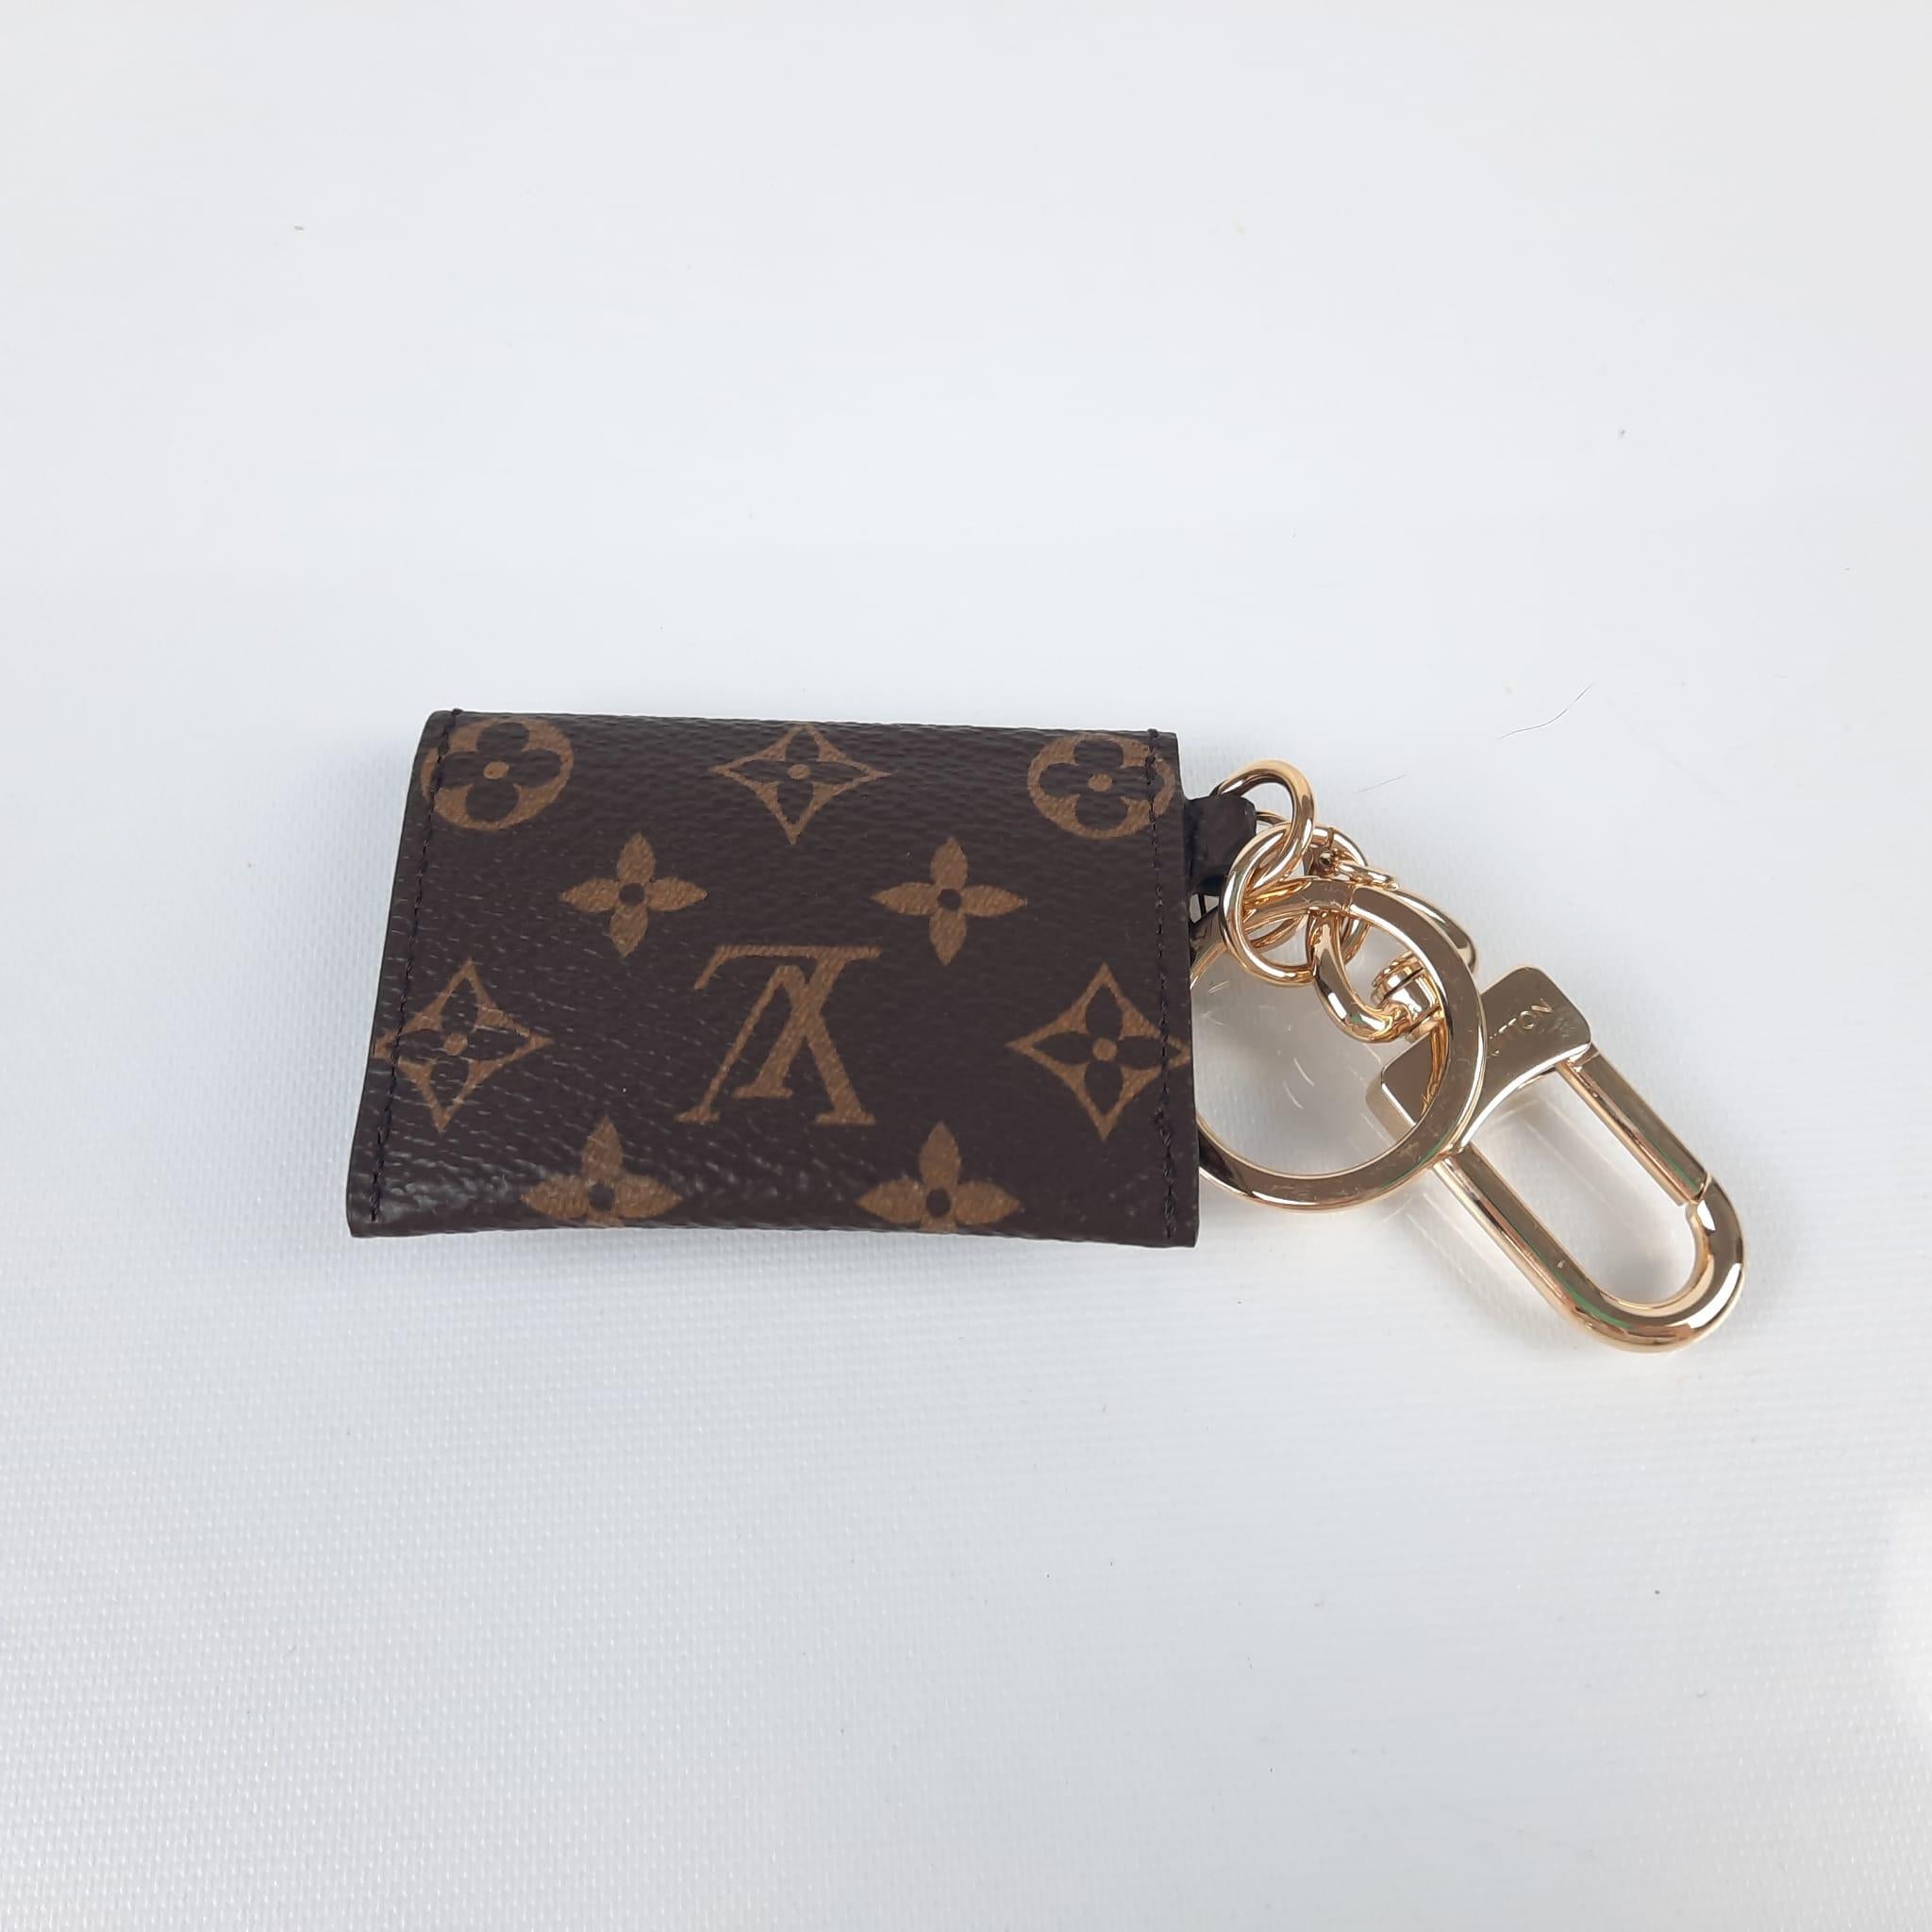 Louis Vuitton Bag charm and Kirigami pouch key ring monogram In New Condition For Sale In Nicosia, CY